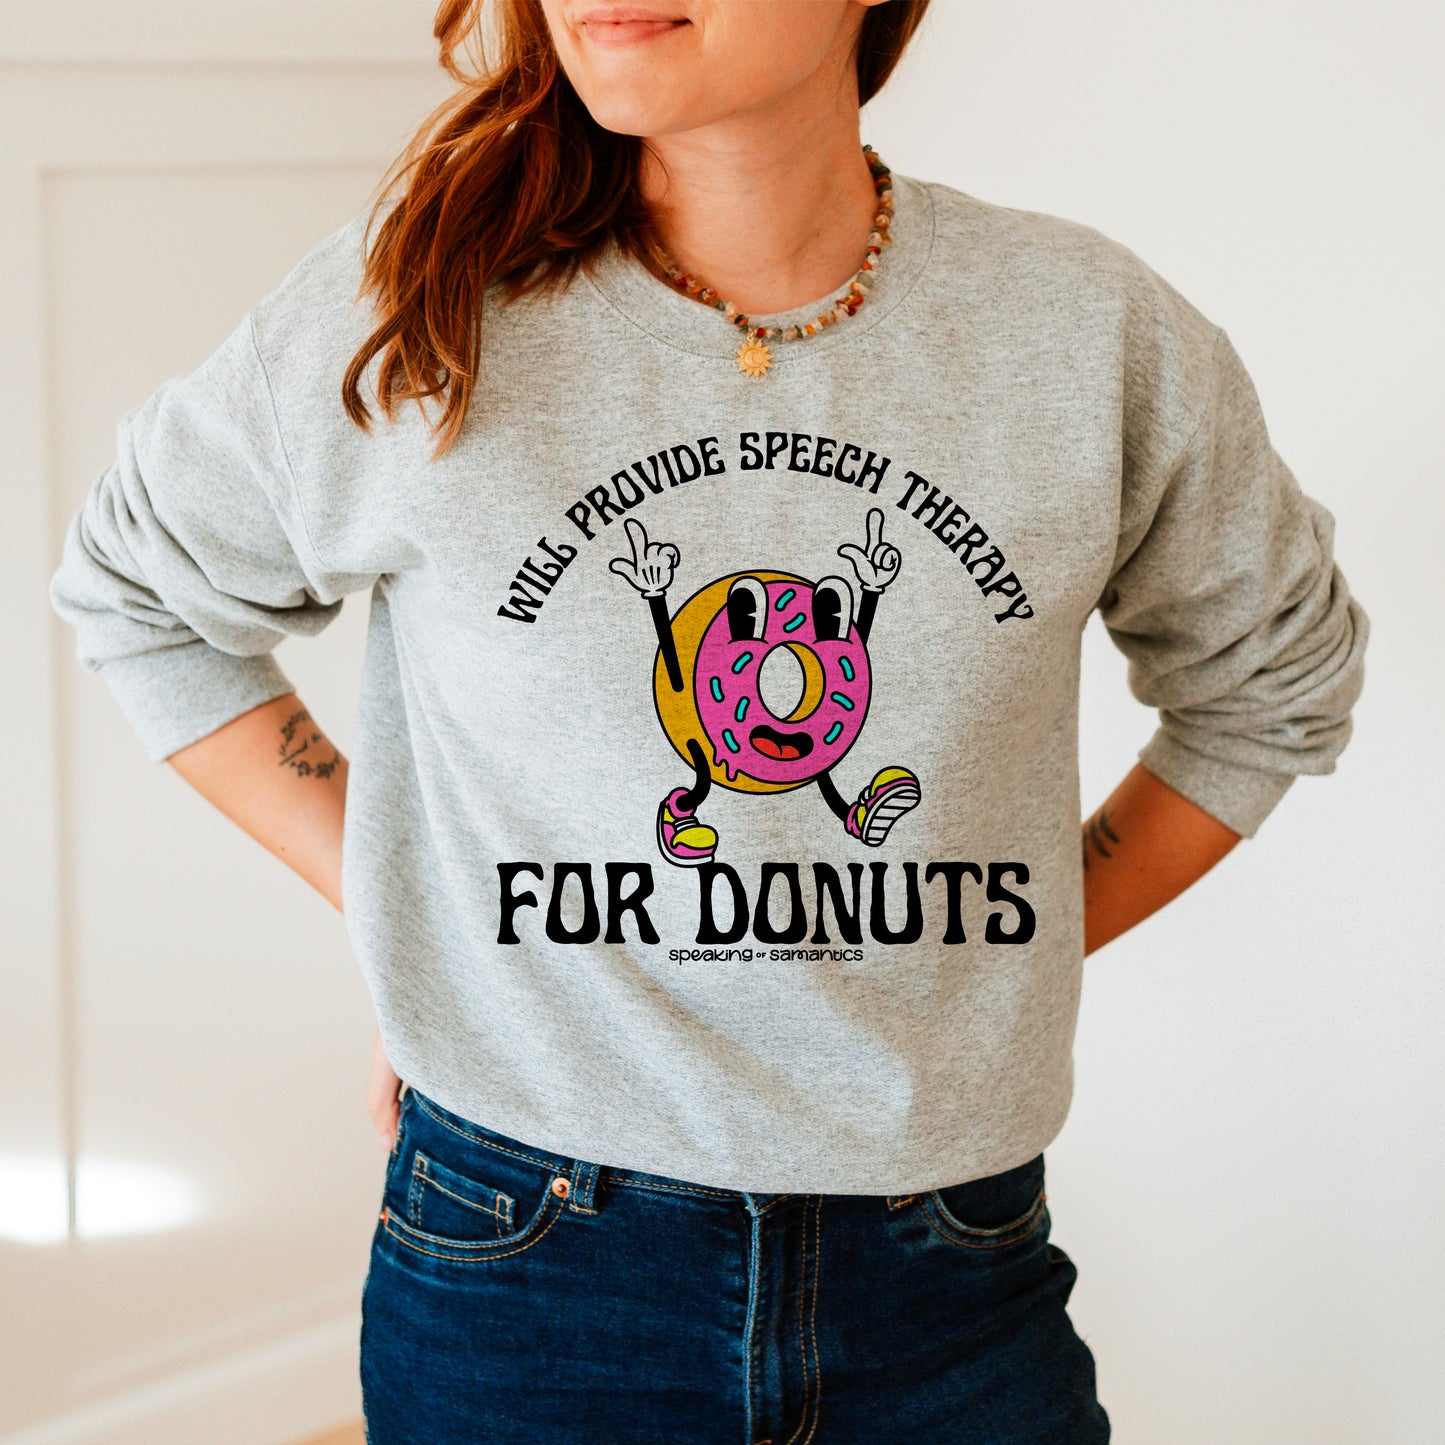 Will Provide Speech Therapy For Donuts Crewneck